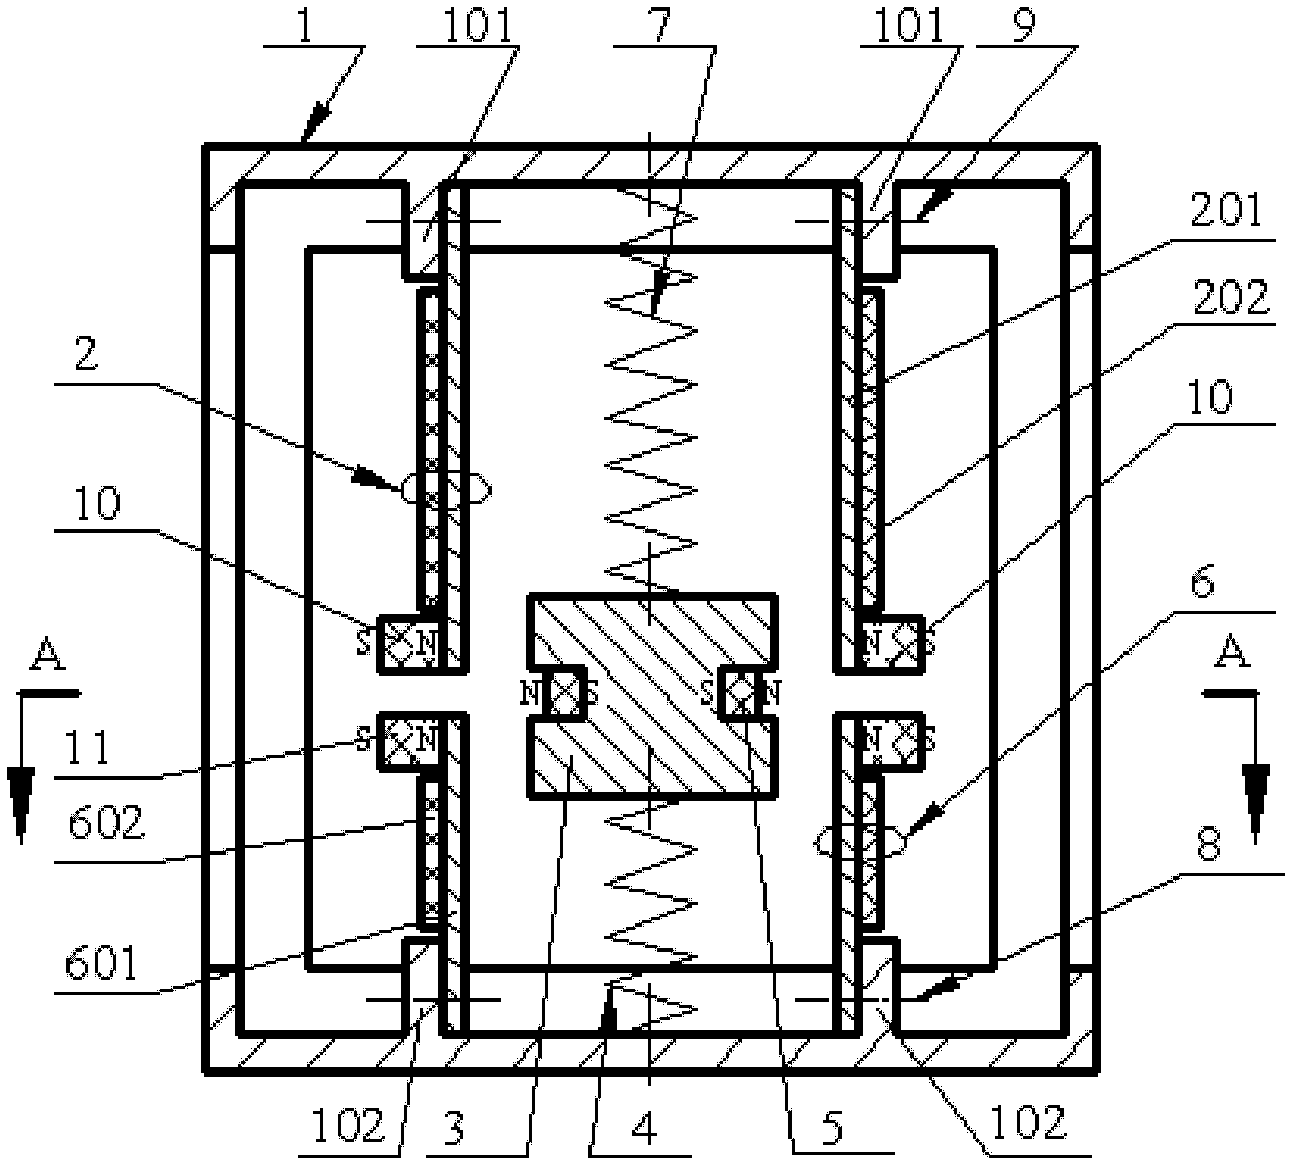 Multidimensional vibration energy collector capable of realizing non-contact excitement